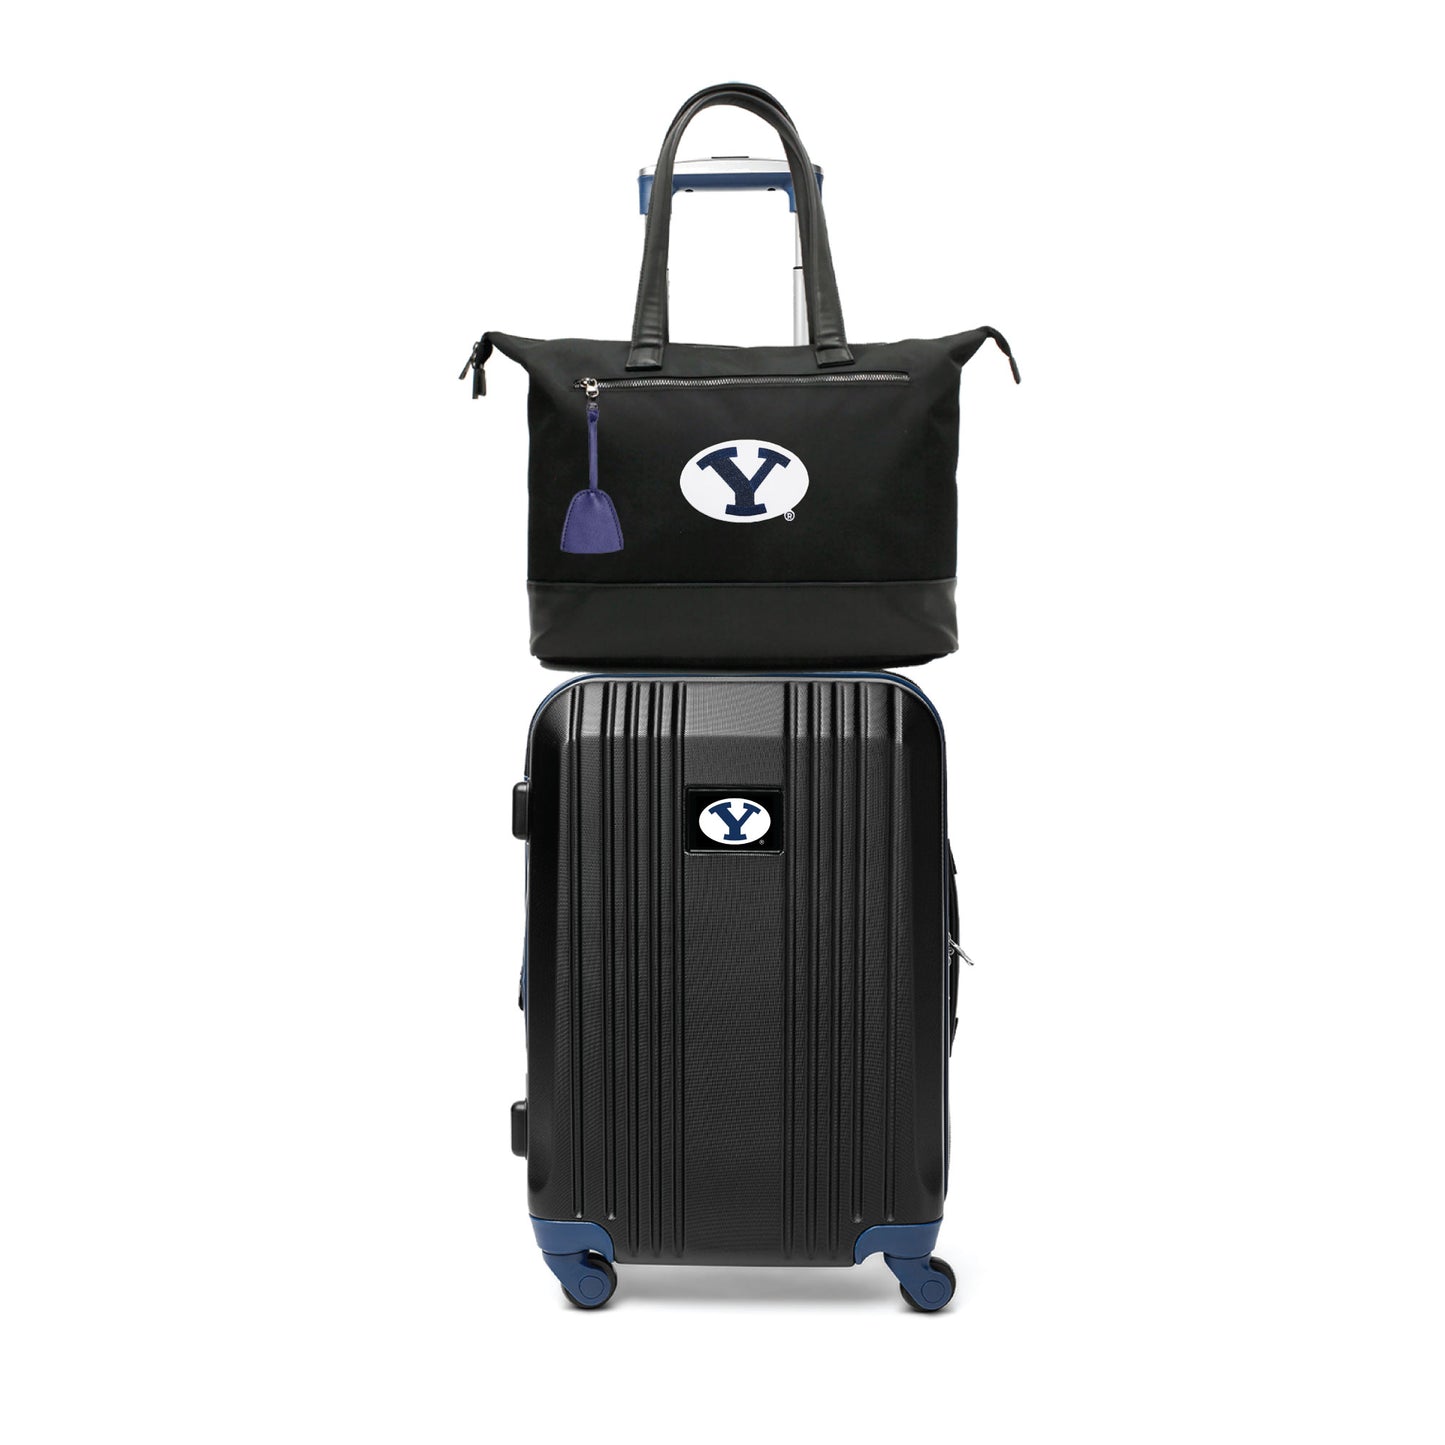 Brigham Young (BYU) Premium Laptop Tote Bag and Luggage Set